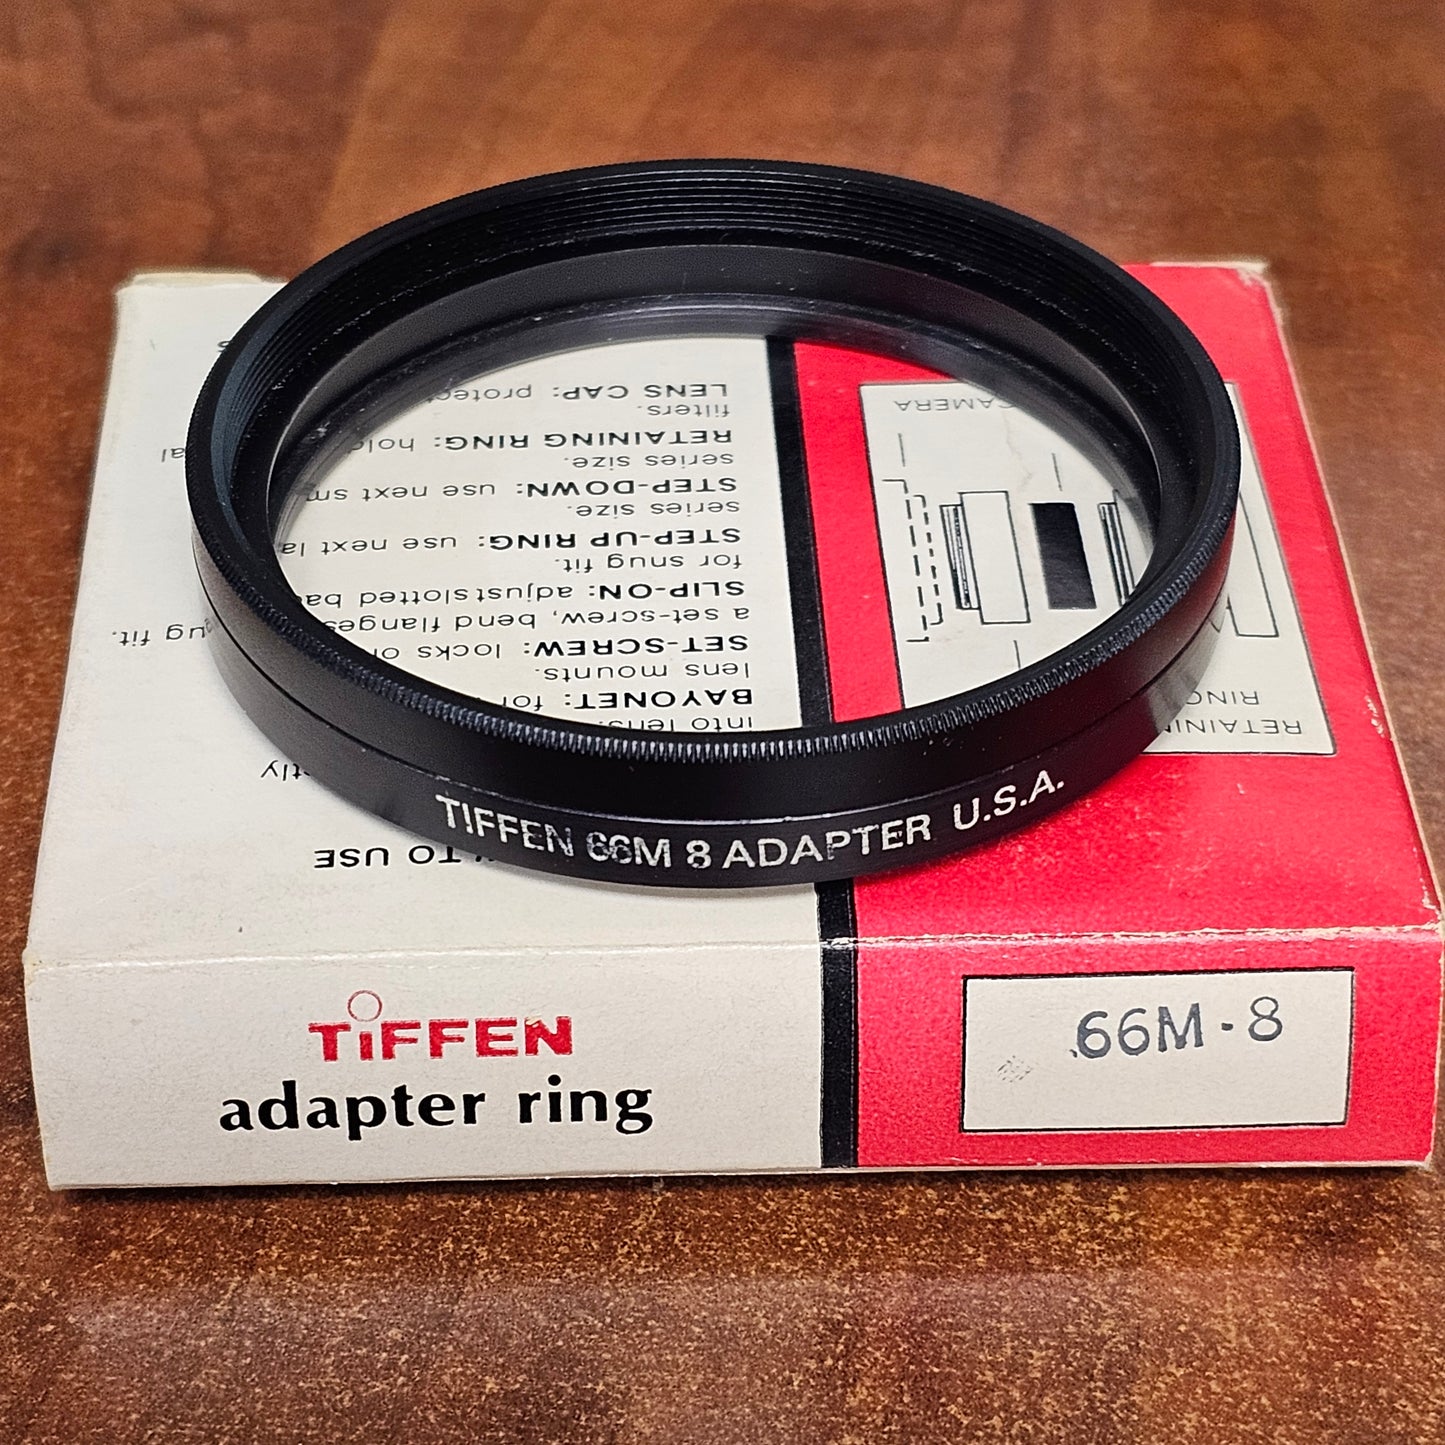 Tiffen 66M-8 Series 8 Adapter Ring with Retaining Ring